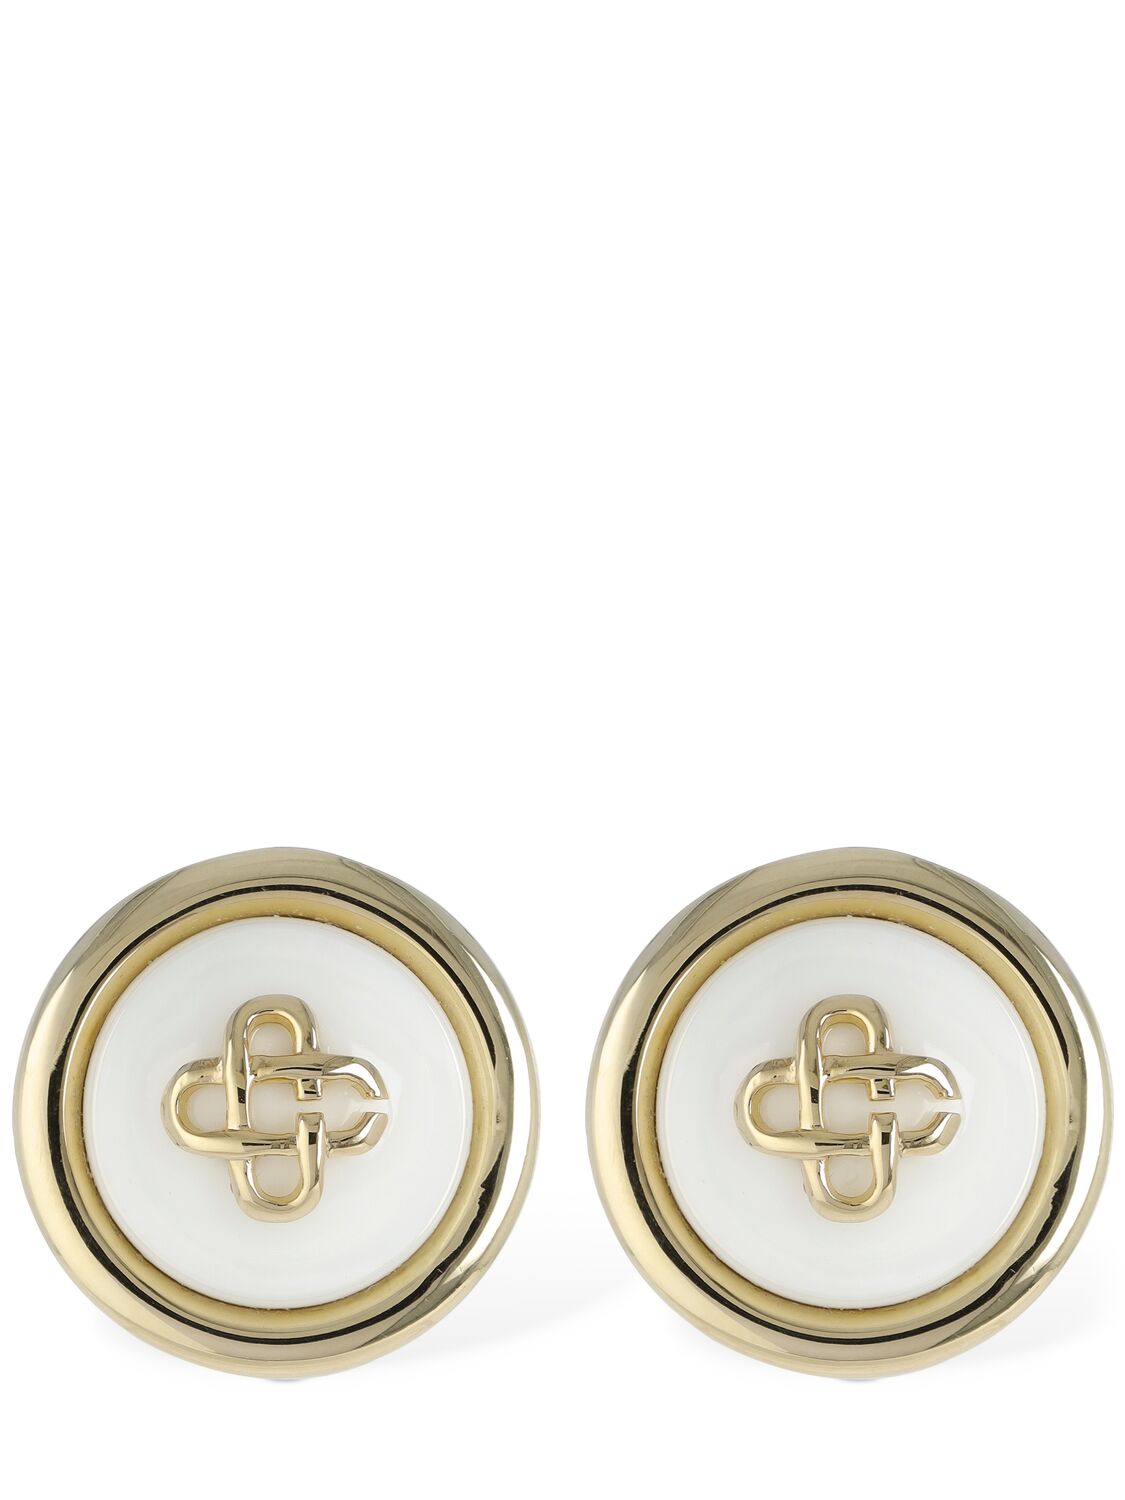 Image of Cc Dome Stud Earrings